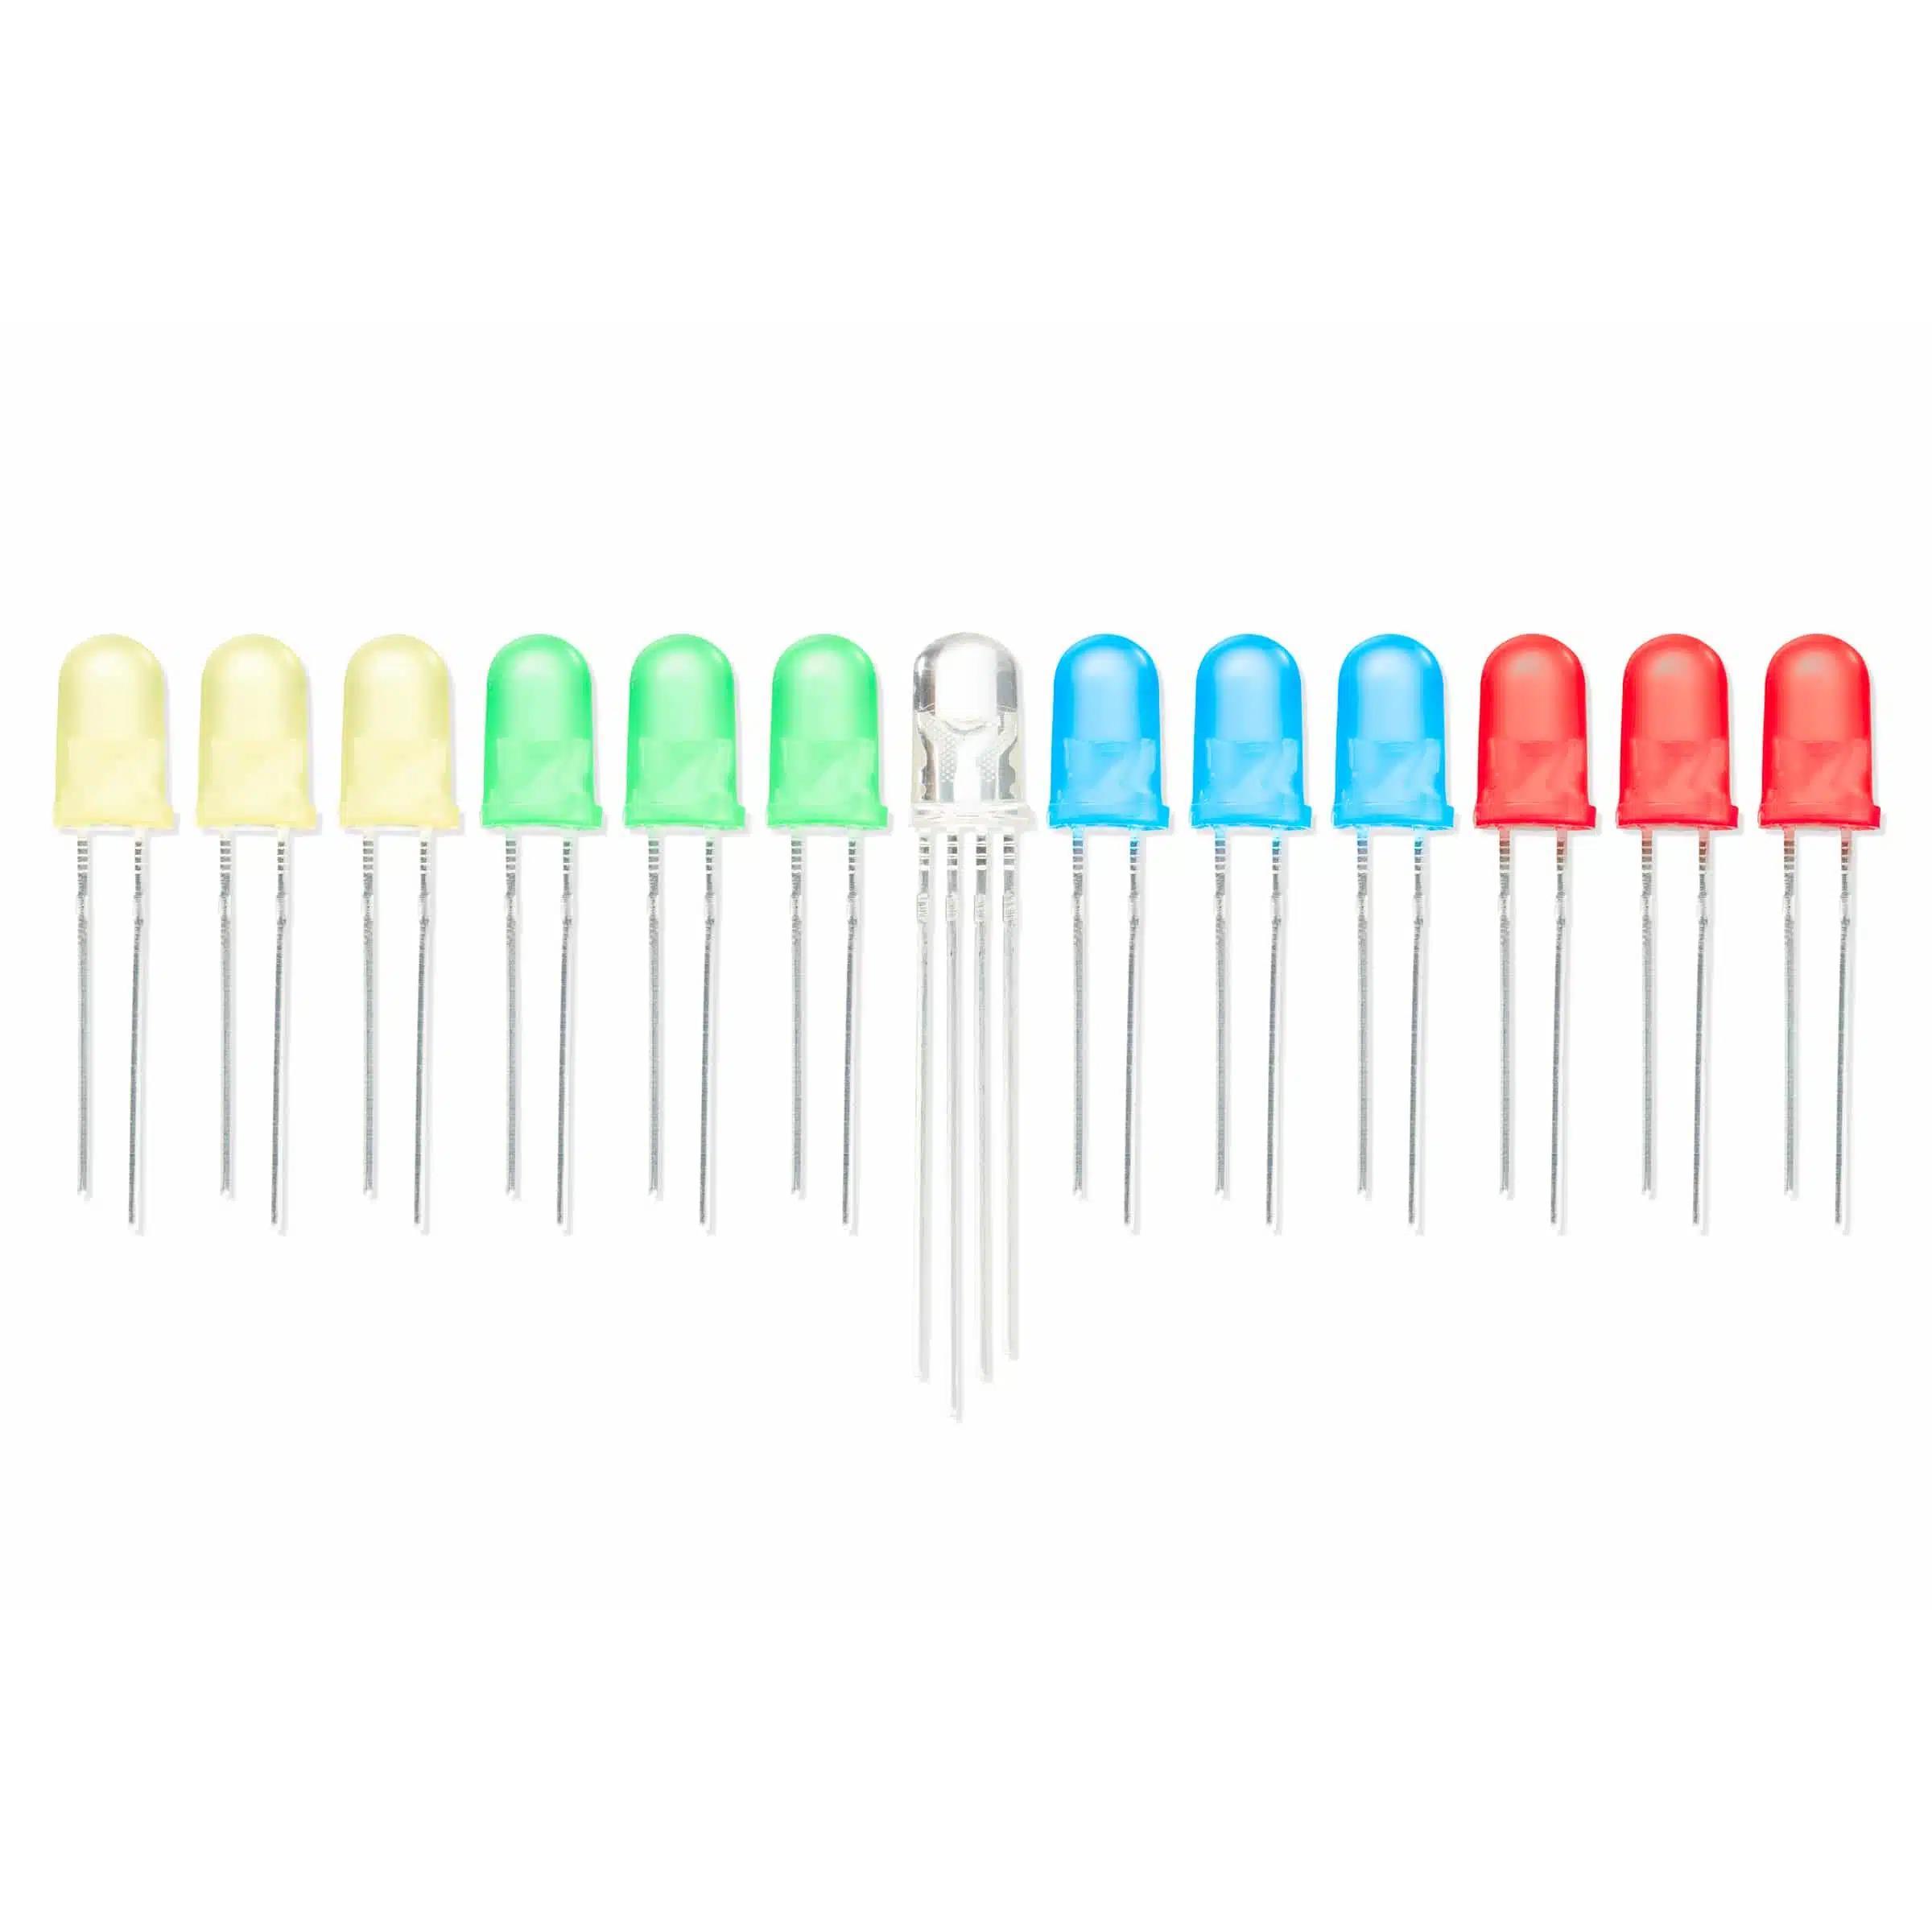 【333295】5MM LED DIODE PACK (13 PIECES)